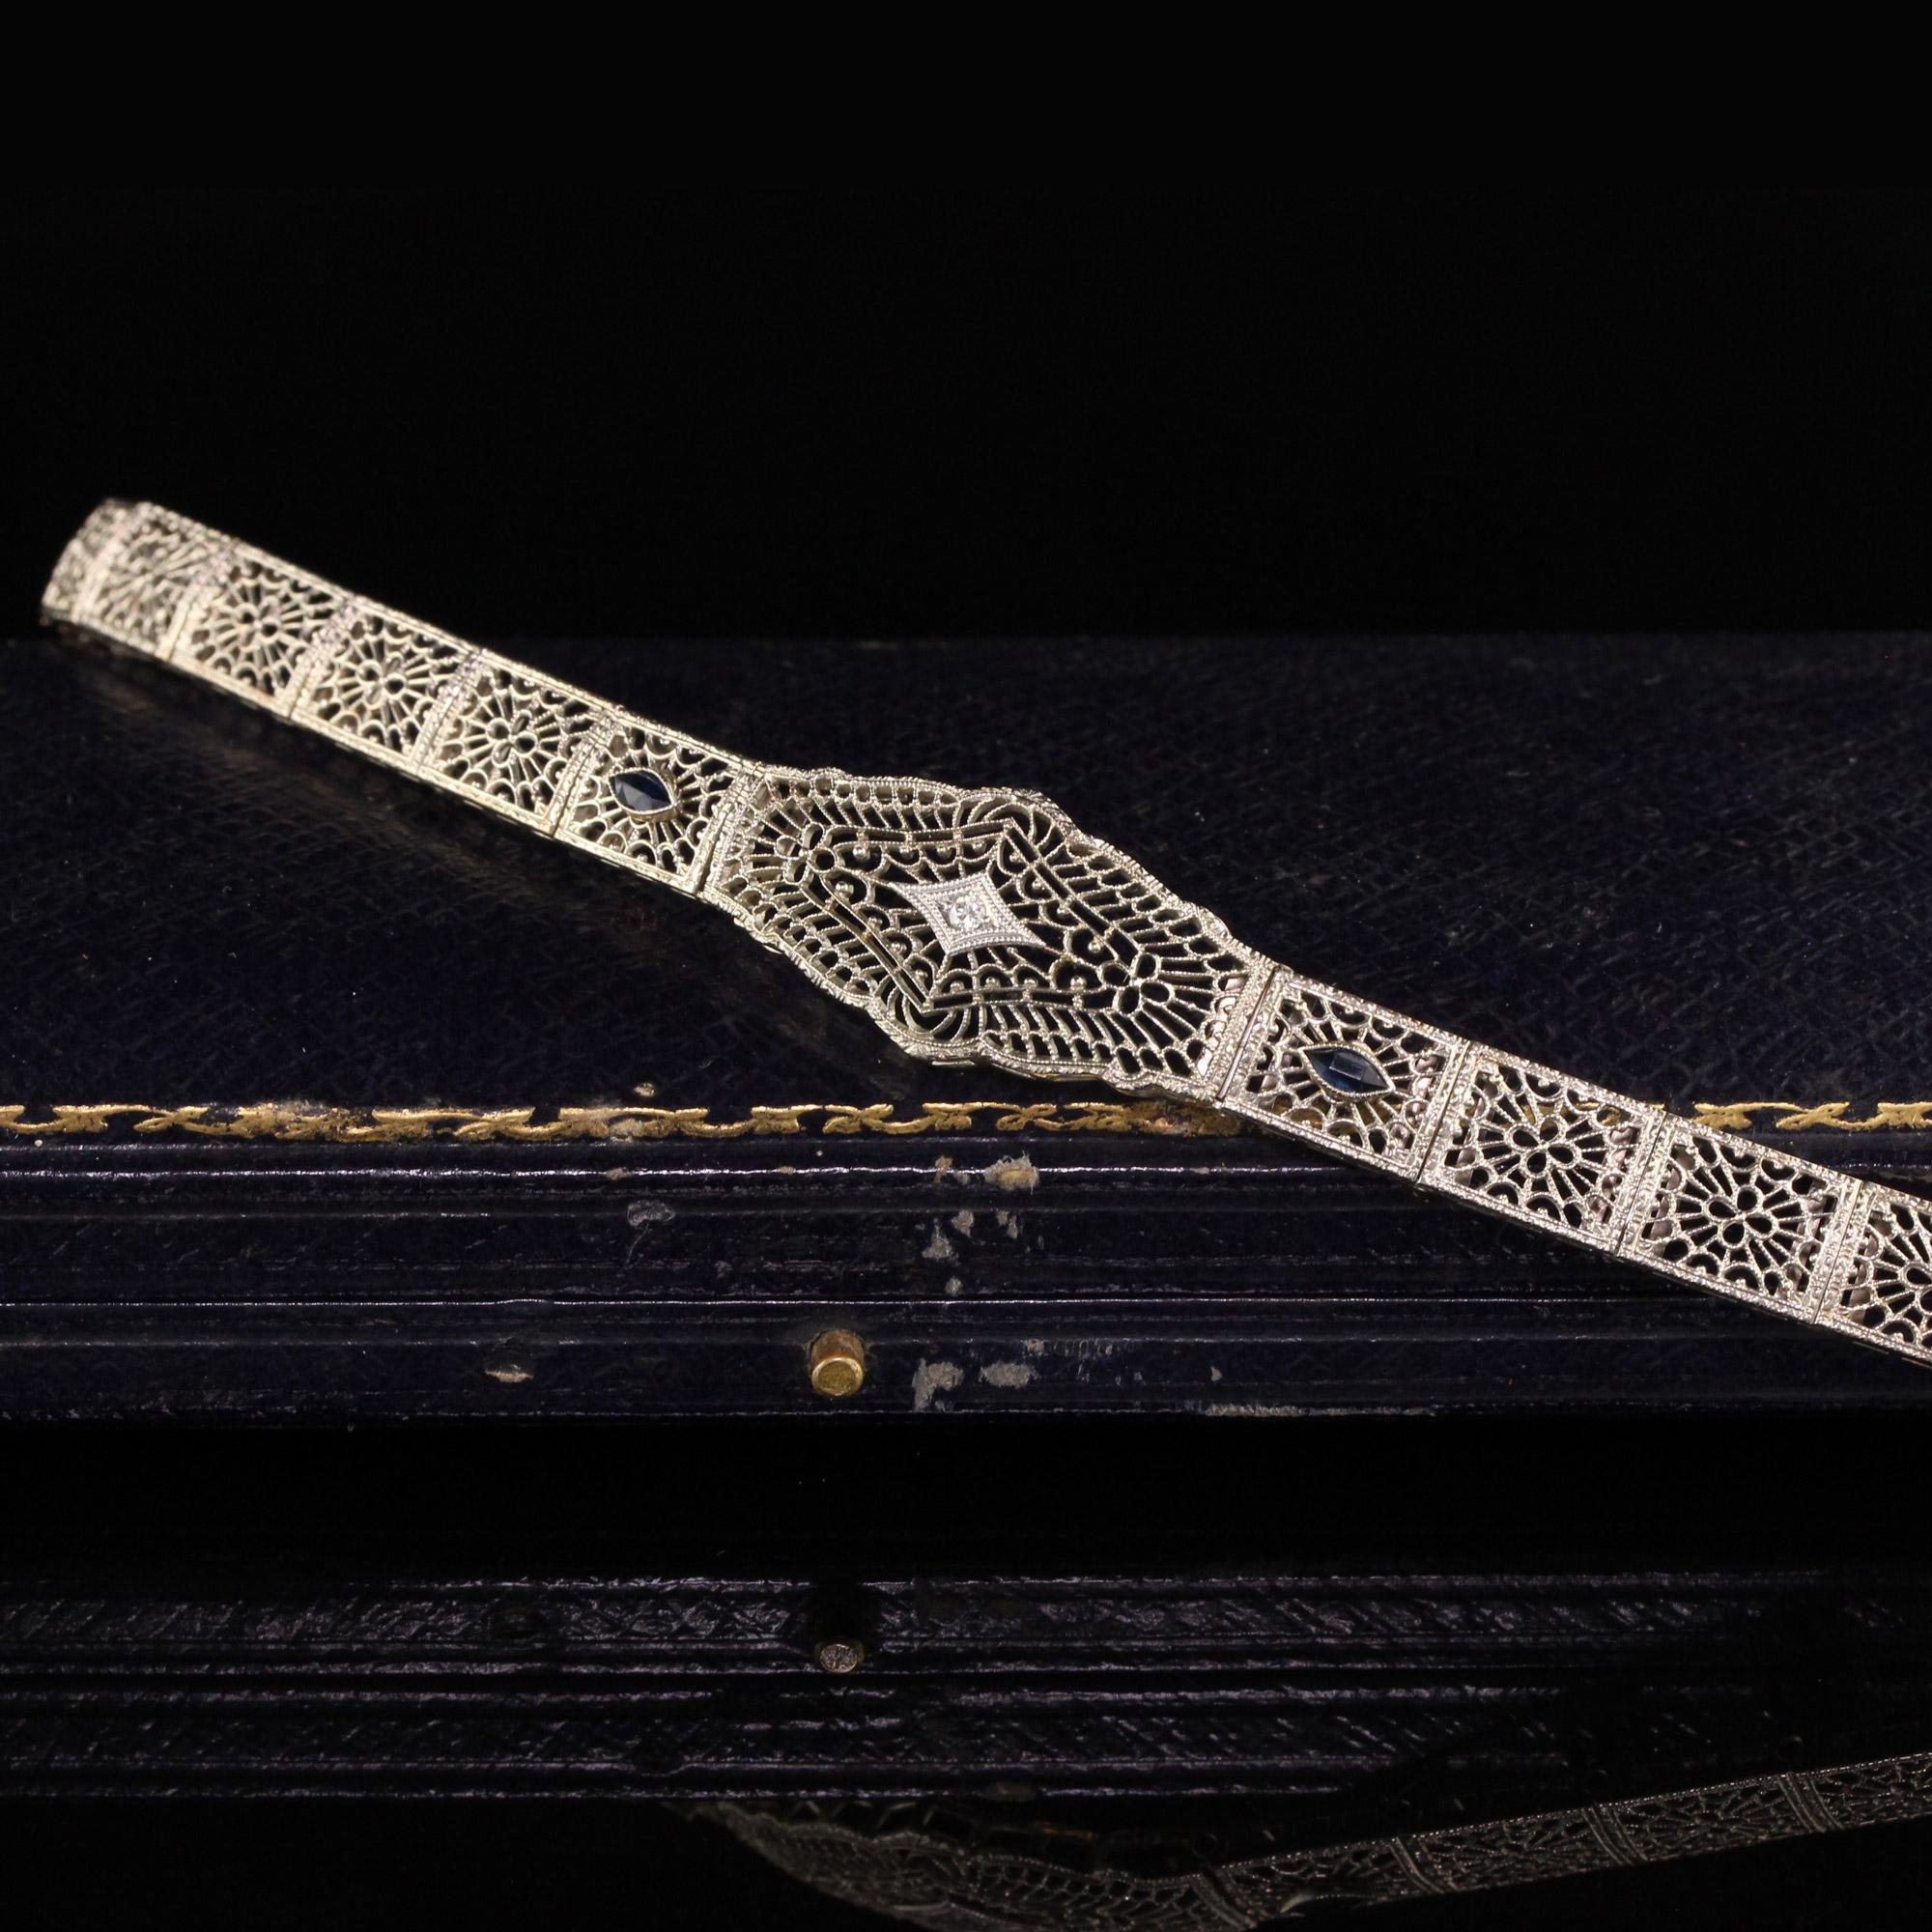 Stunning Antique Art Deco 10K White Gold Diamond and Sapphire Filigree Bracelet. This bracelet is in amazing condition and has gorgeous filigree work throughout the entire bracelet. 

Item #B0036

Metal: 10K White Gold

Weight: 11.6 Grams

Total